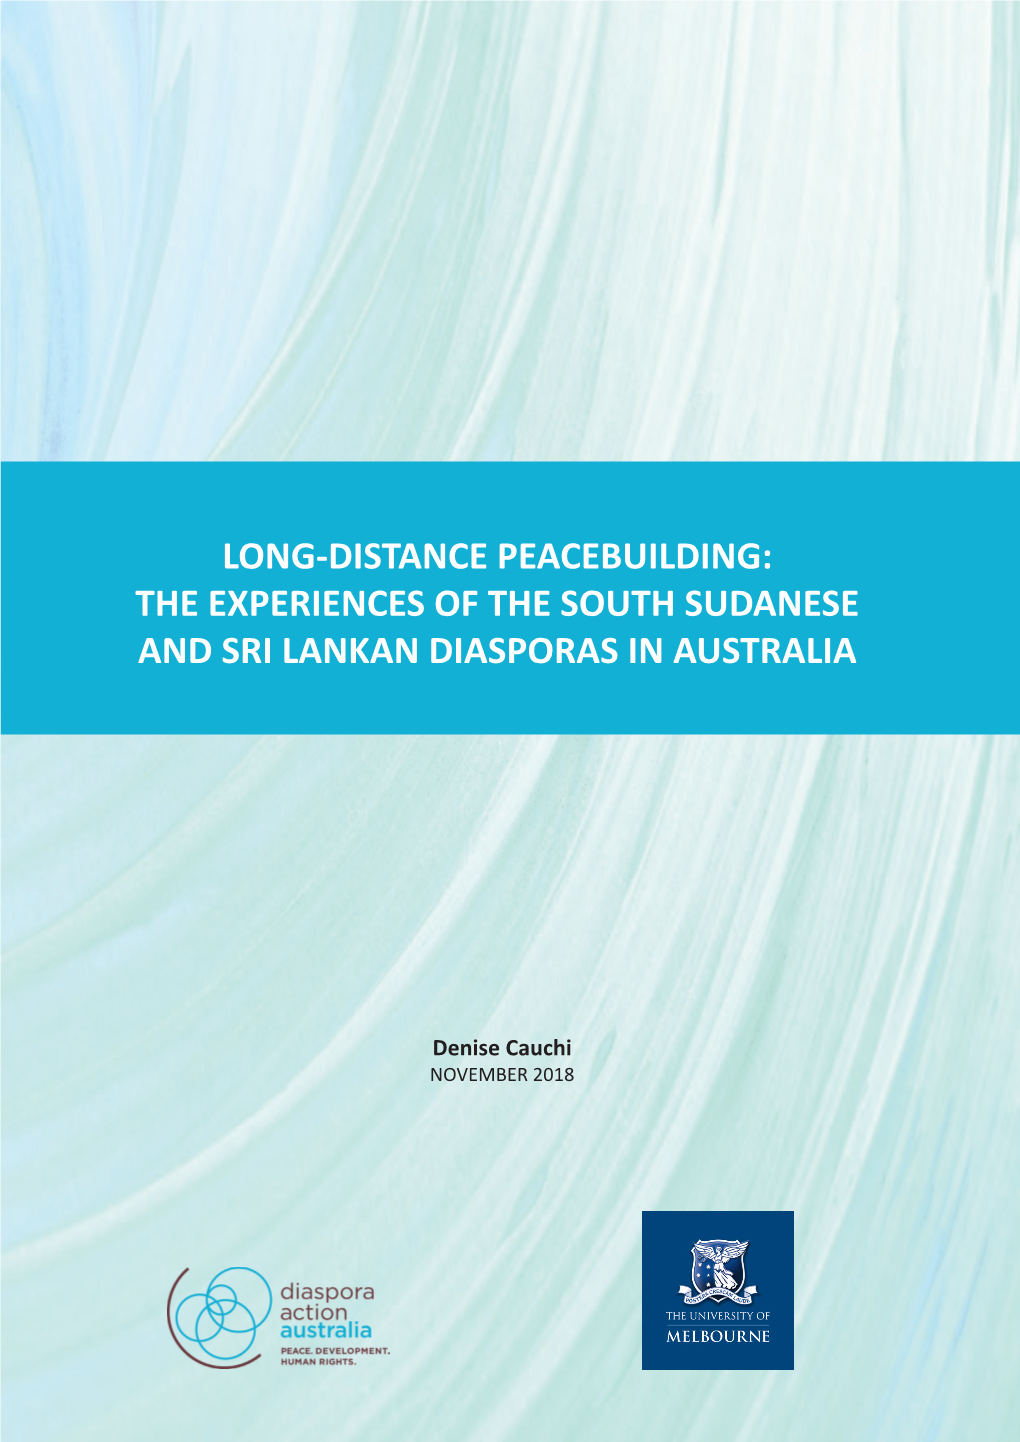 Long-Distance Peacebuilding: the Experiences of the South Sudanese and Sri Lankan Diasporas in Australia